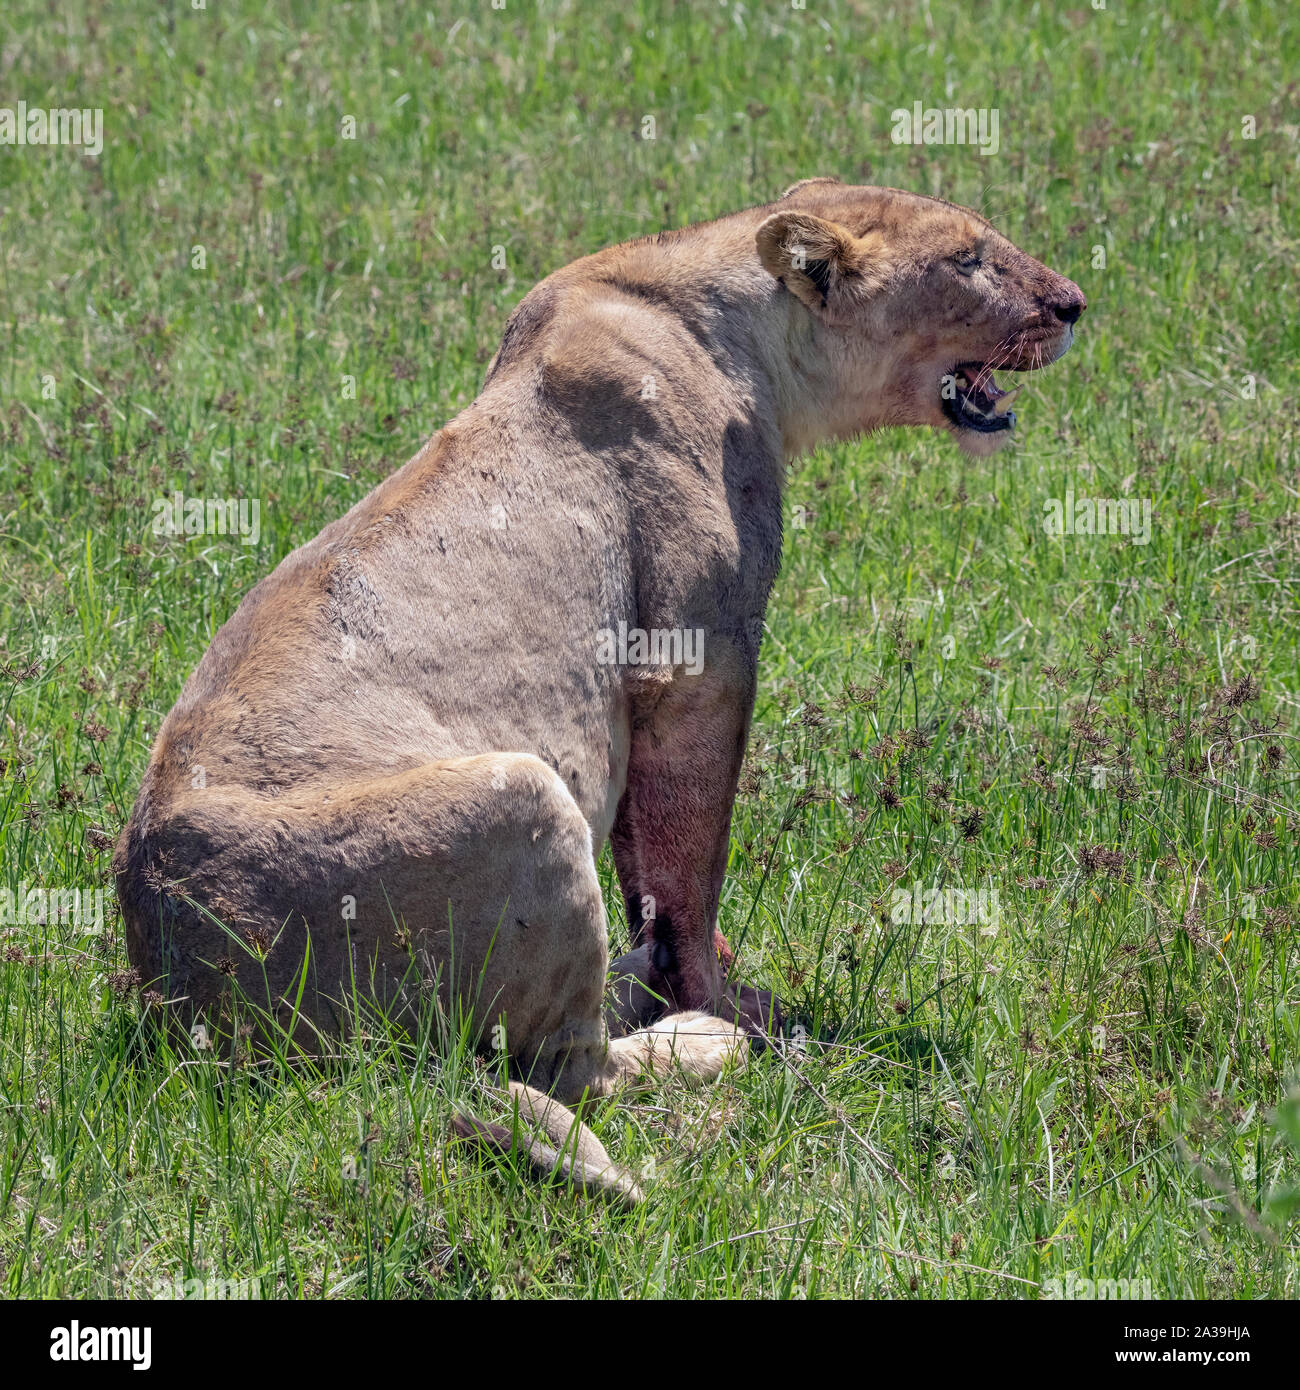 Lioness resting after feasting on a zebra carcass, Ngorongoro Crater, Tanzania Stock Photo